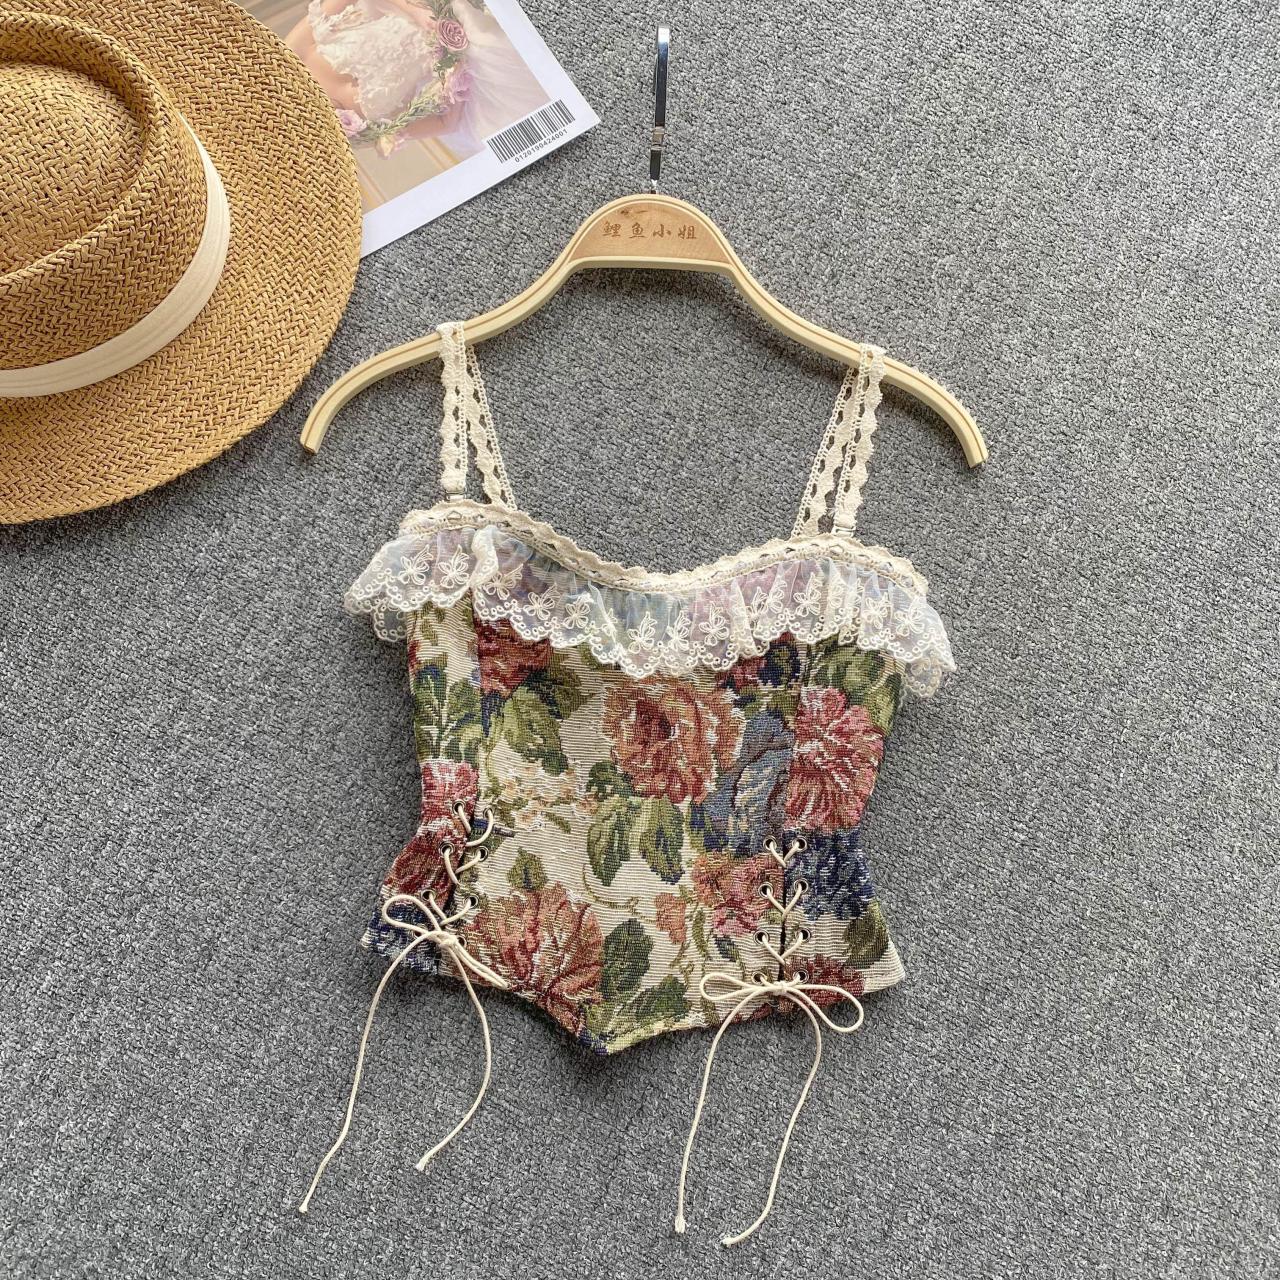 Floral Print Ruffle Lace Camisole Backless Drawstring Elastic Waist Fashion Ladies Retro Chic Tank Top